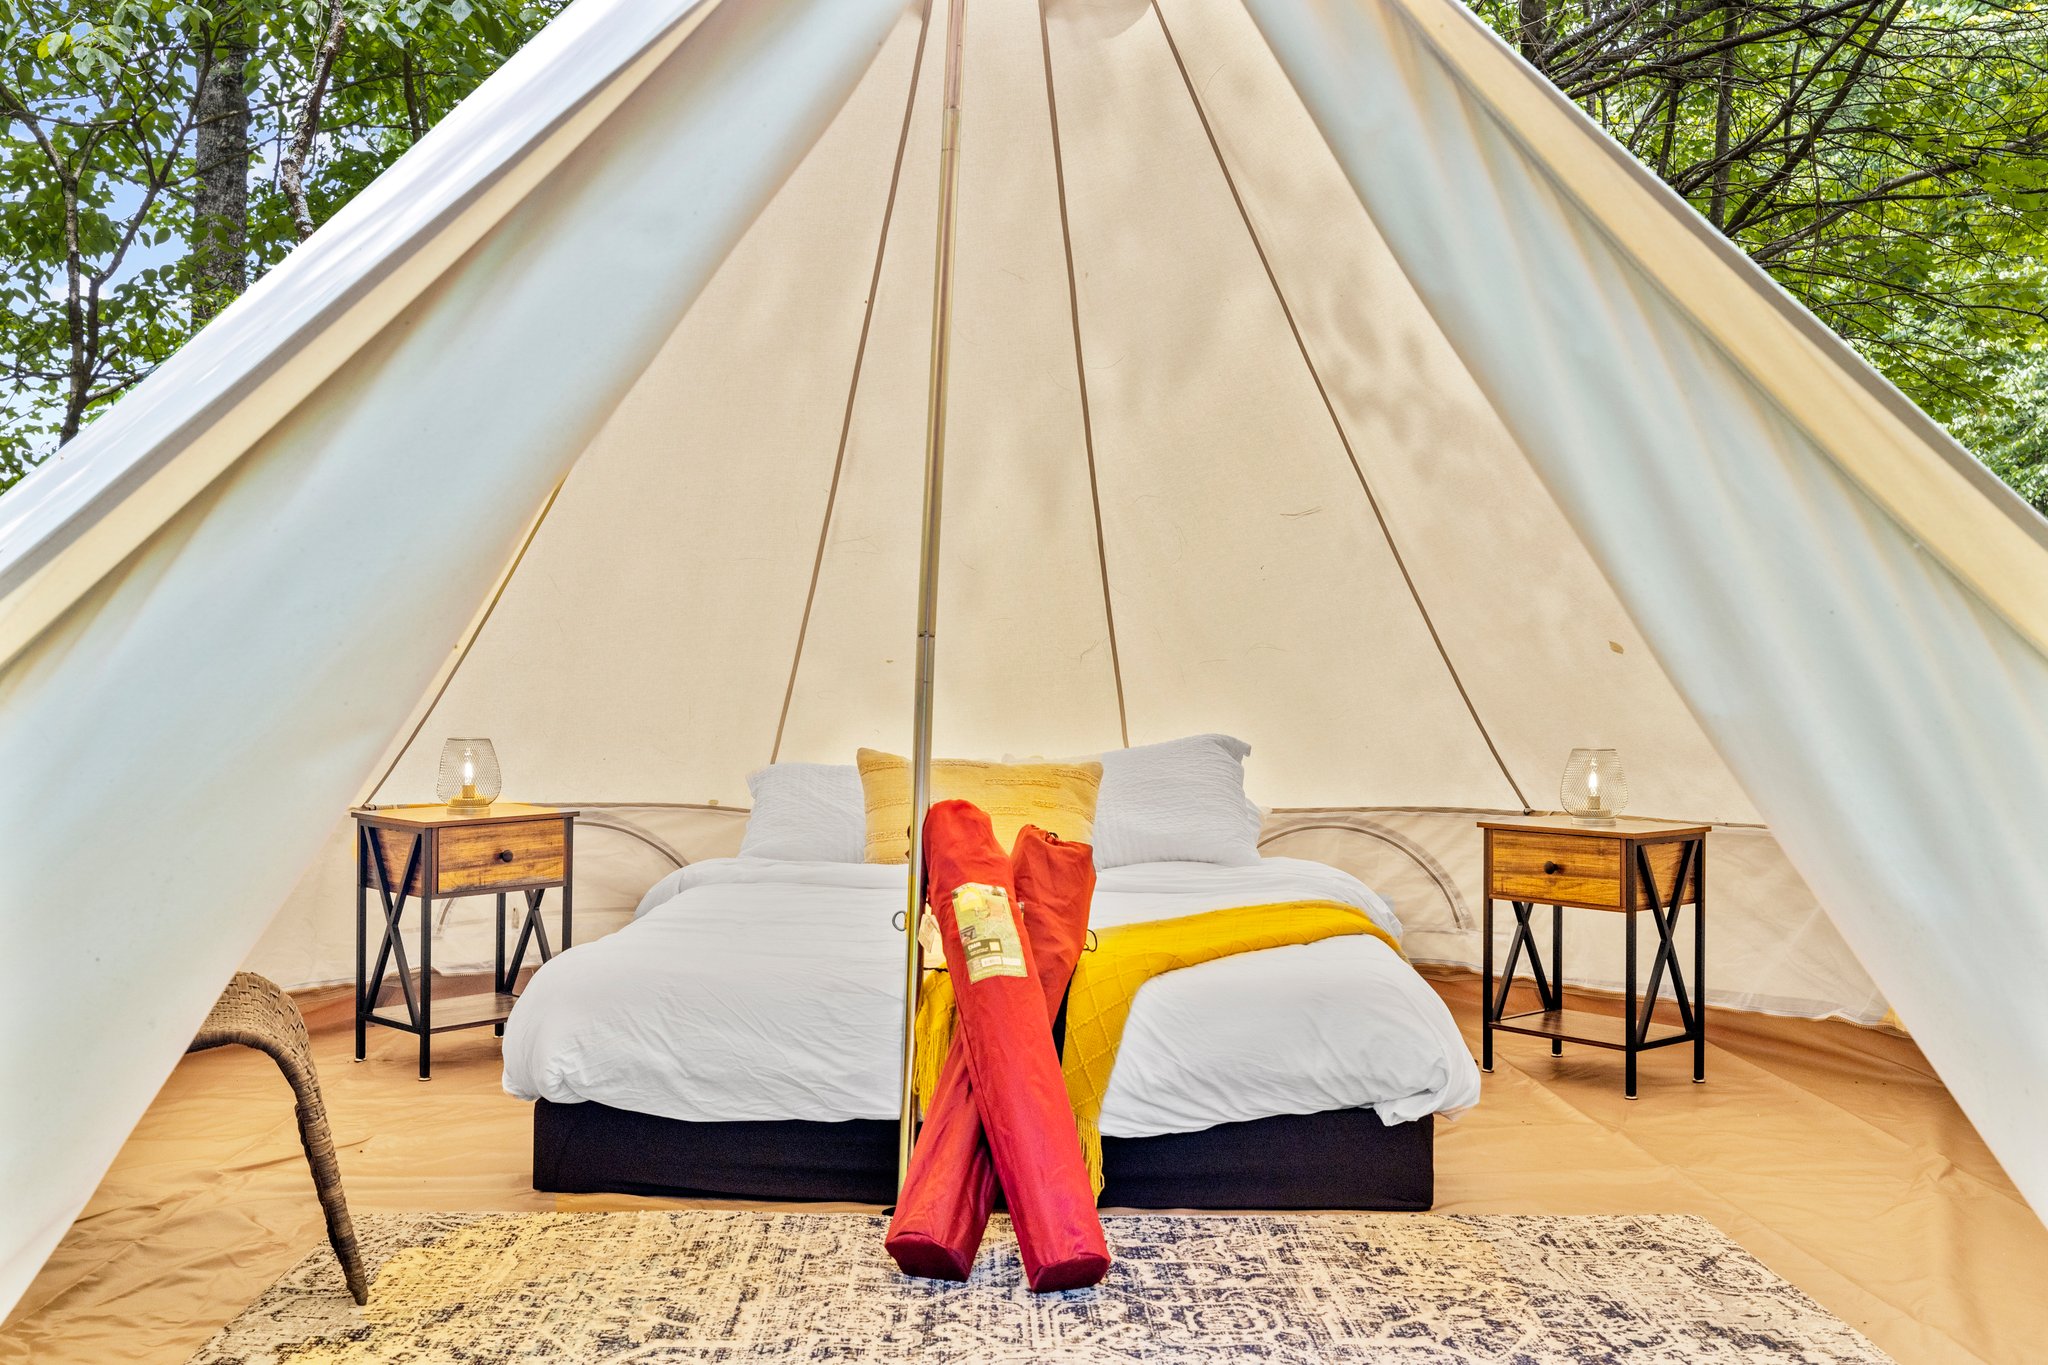 Explore the Great Outdoors in Style: Glamping in North Carolina!